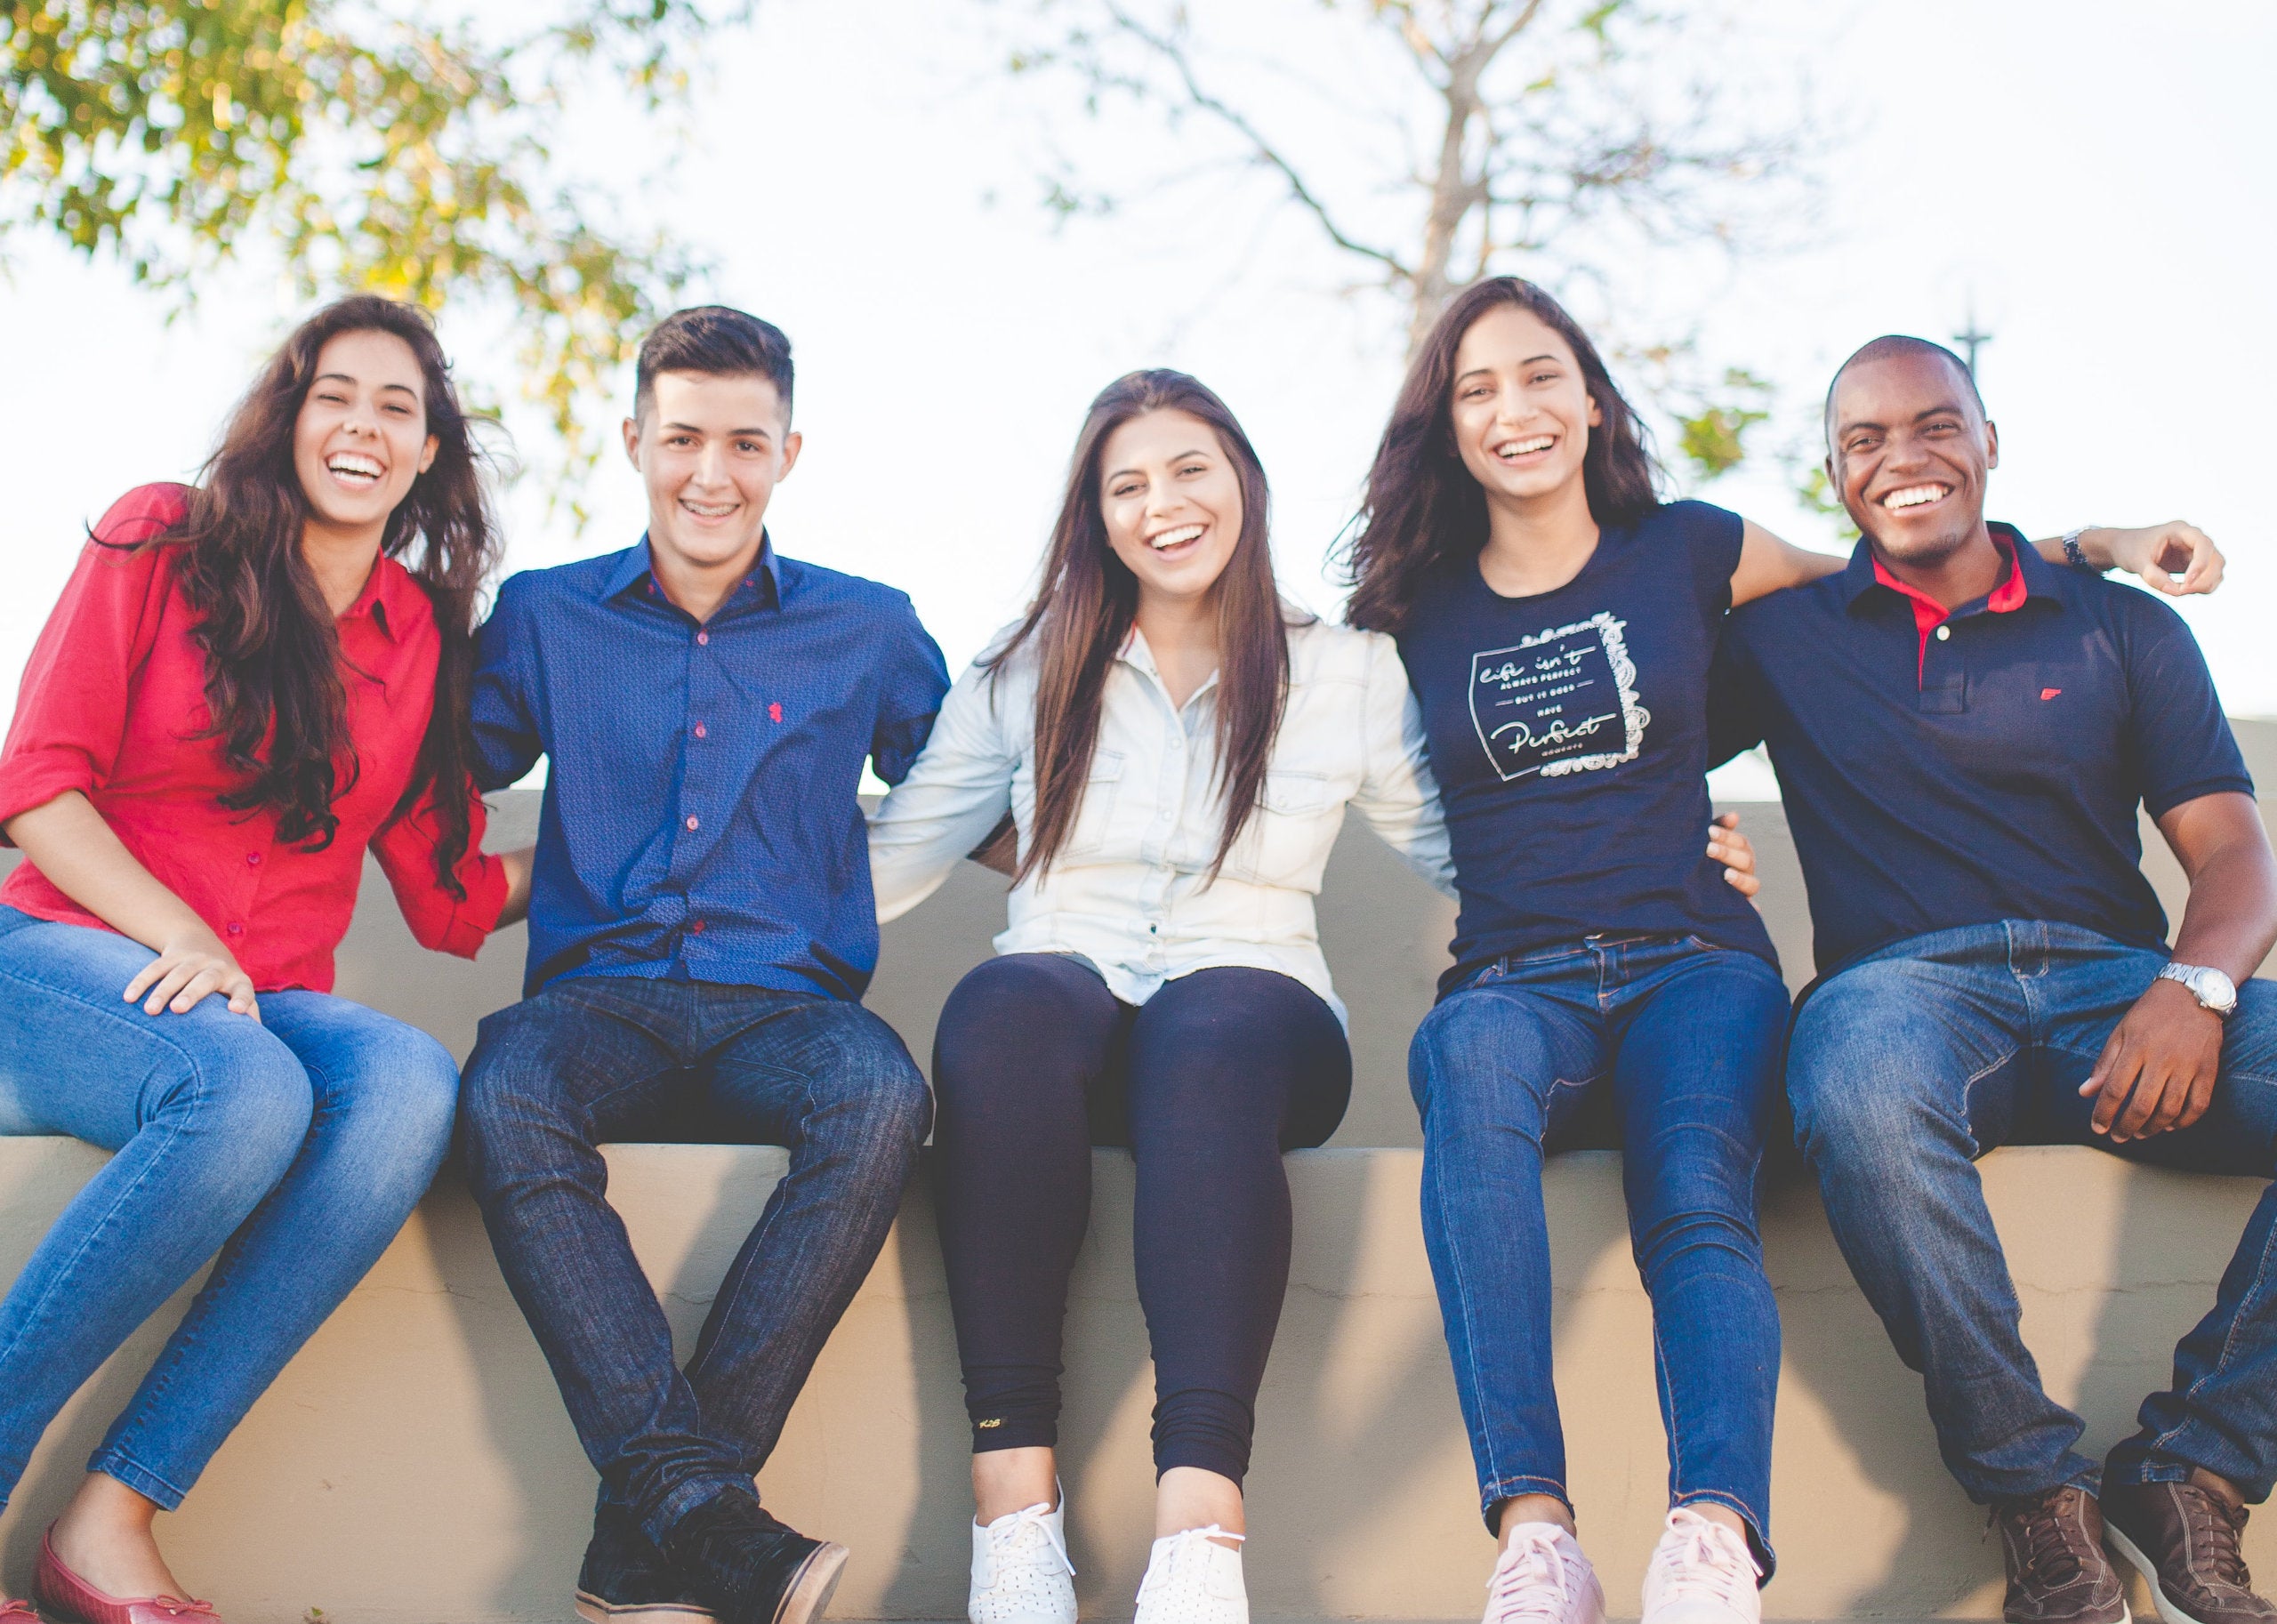 College students sit together on a wall and smile at the camera